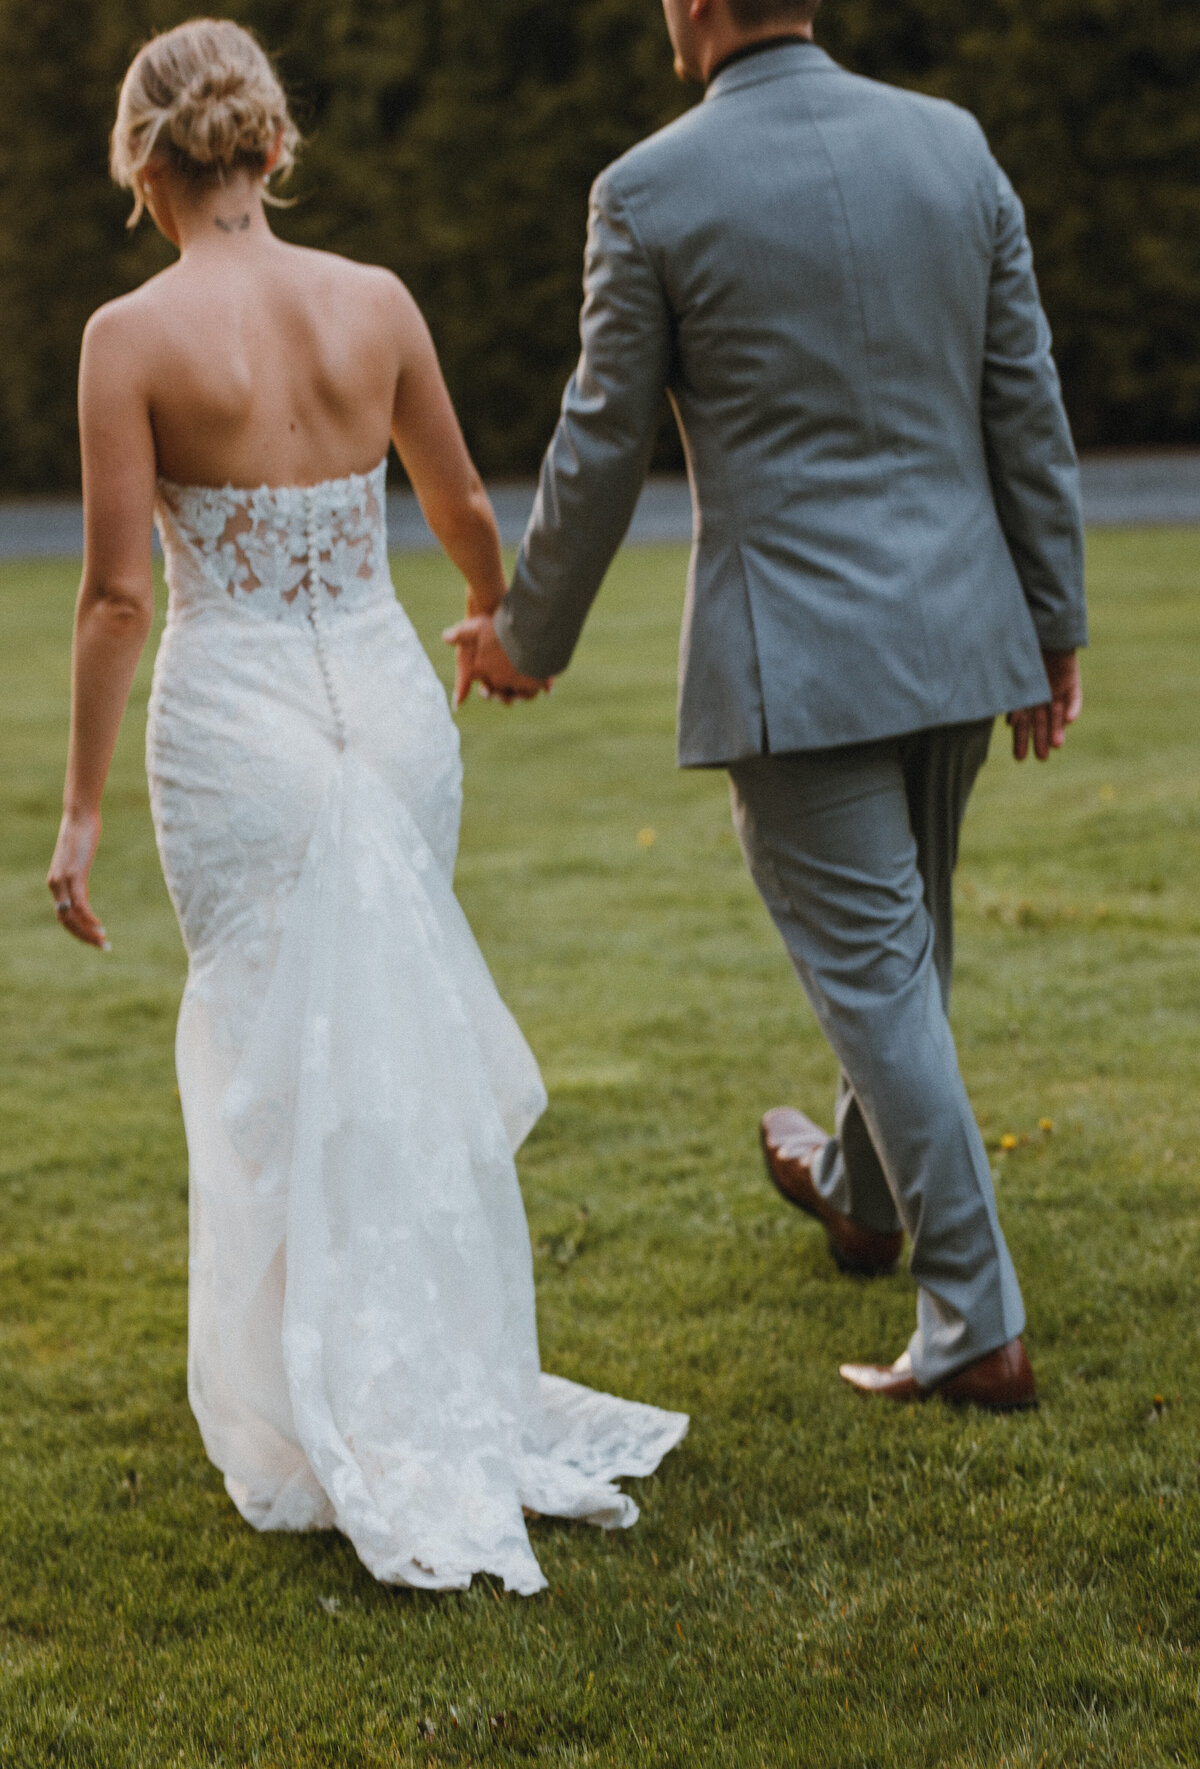 Bride and groom holding hands walking on a grassy lawn